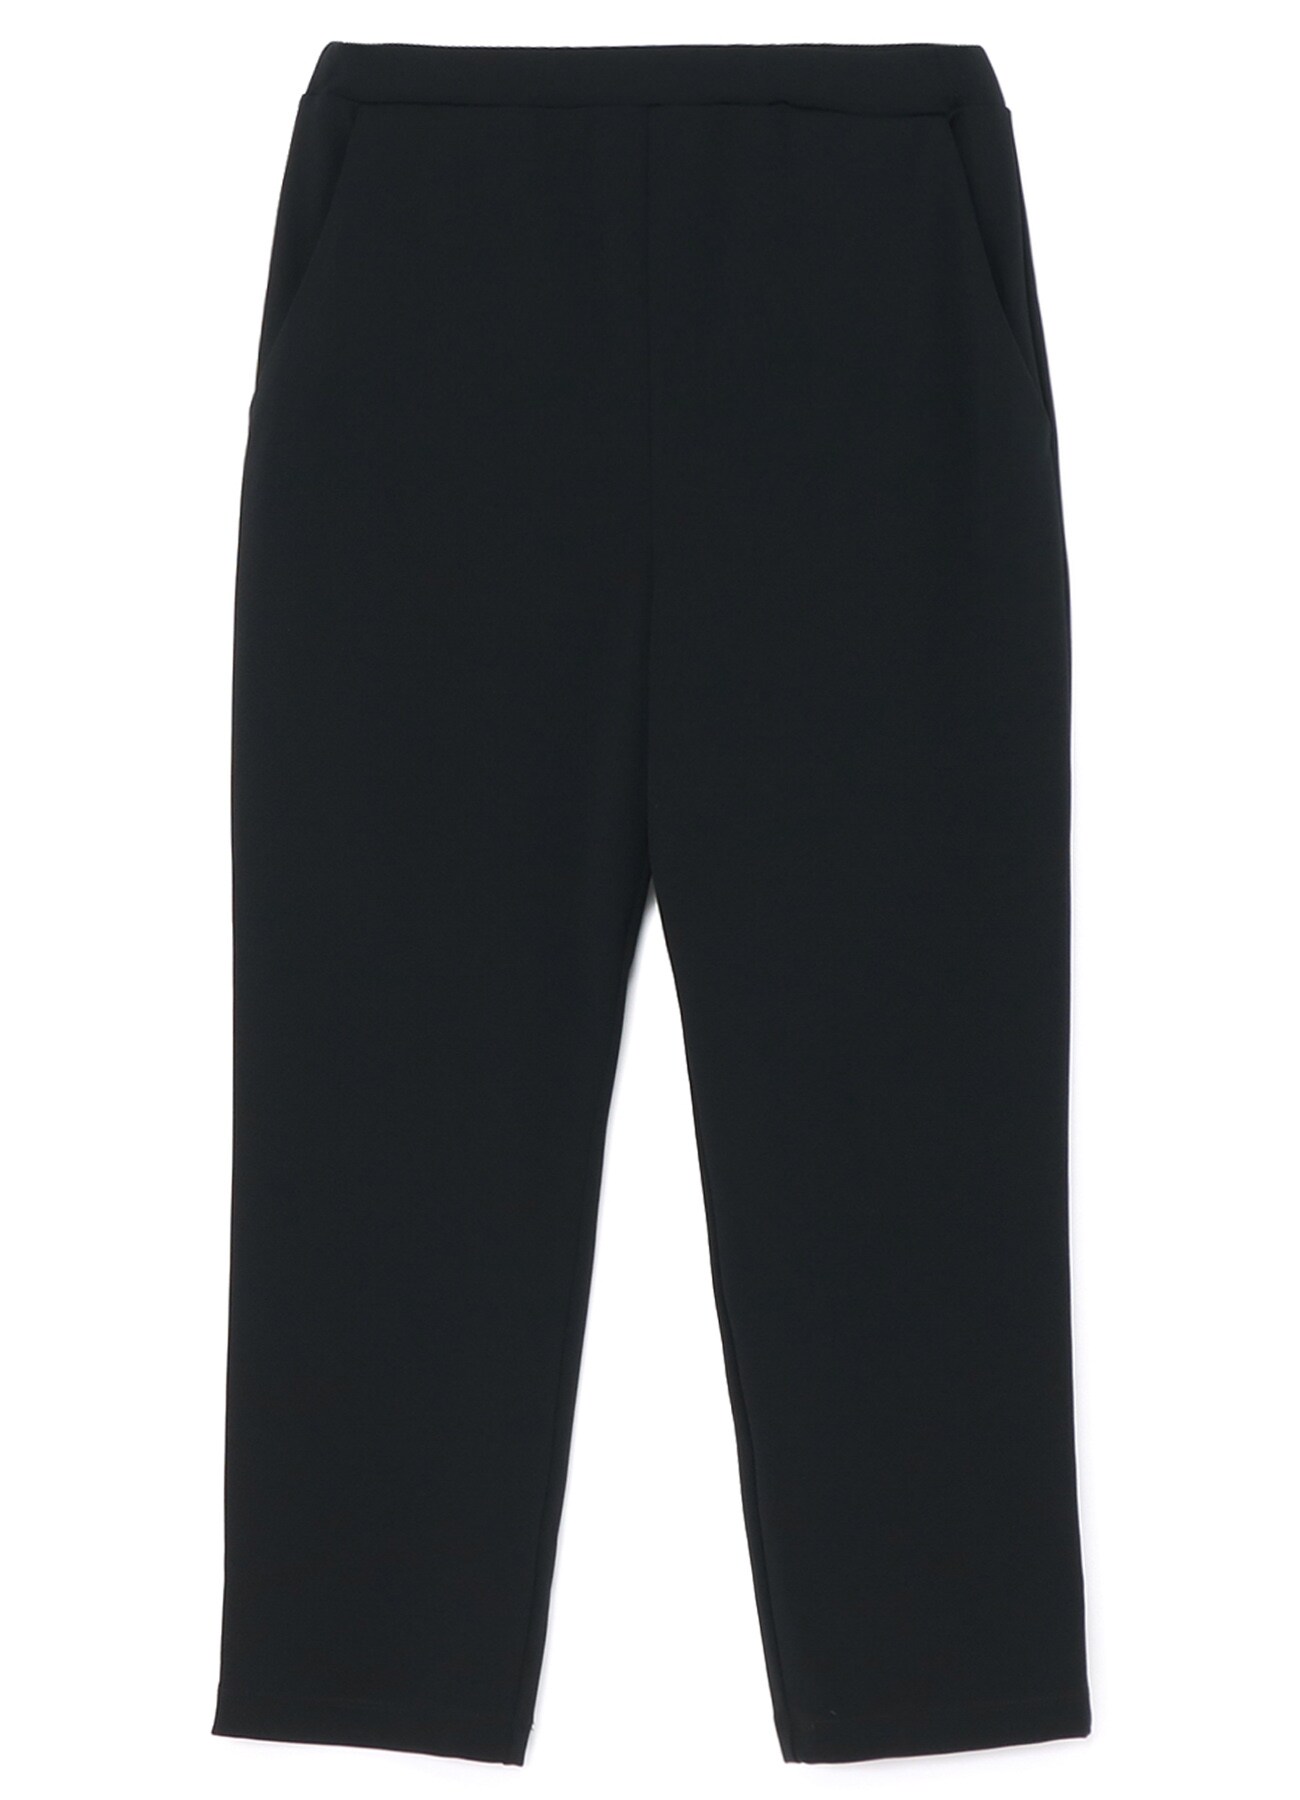 TRIACETATE/POLYESTER JERSEY TAPERED PANTS